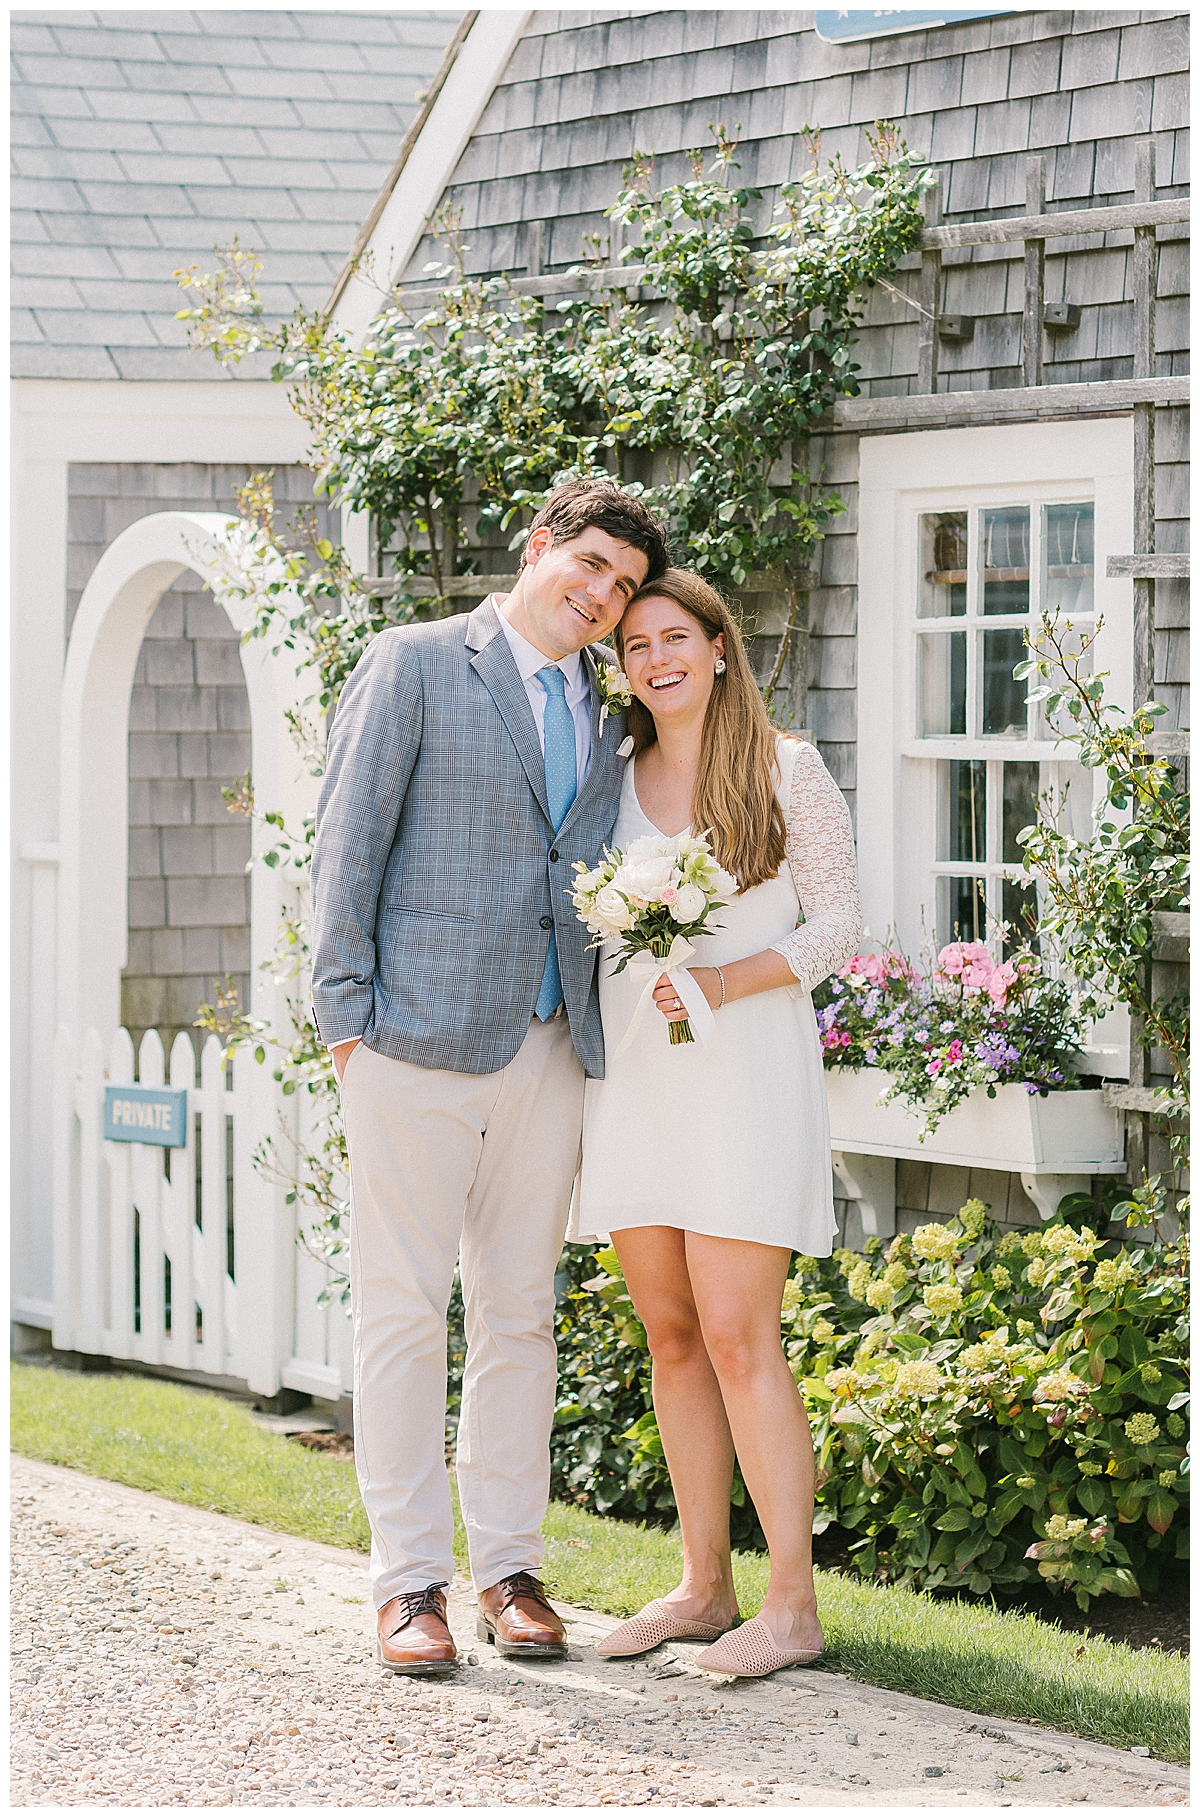 Mollie and Kevin's Nantucket Micro Wedding